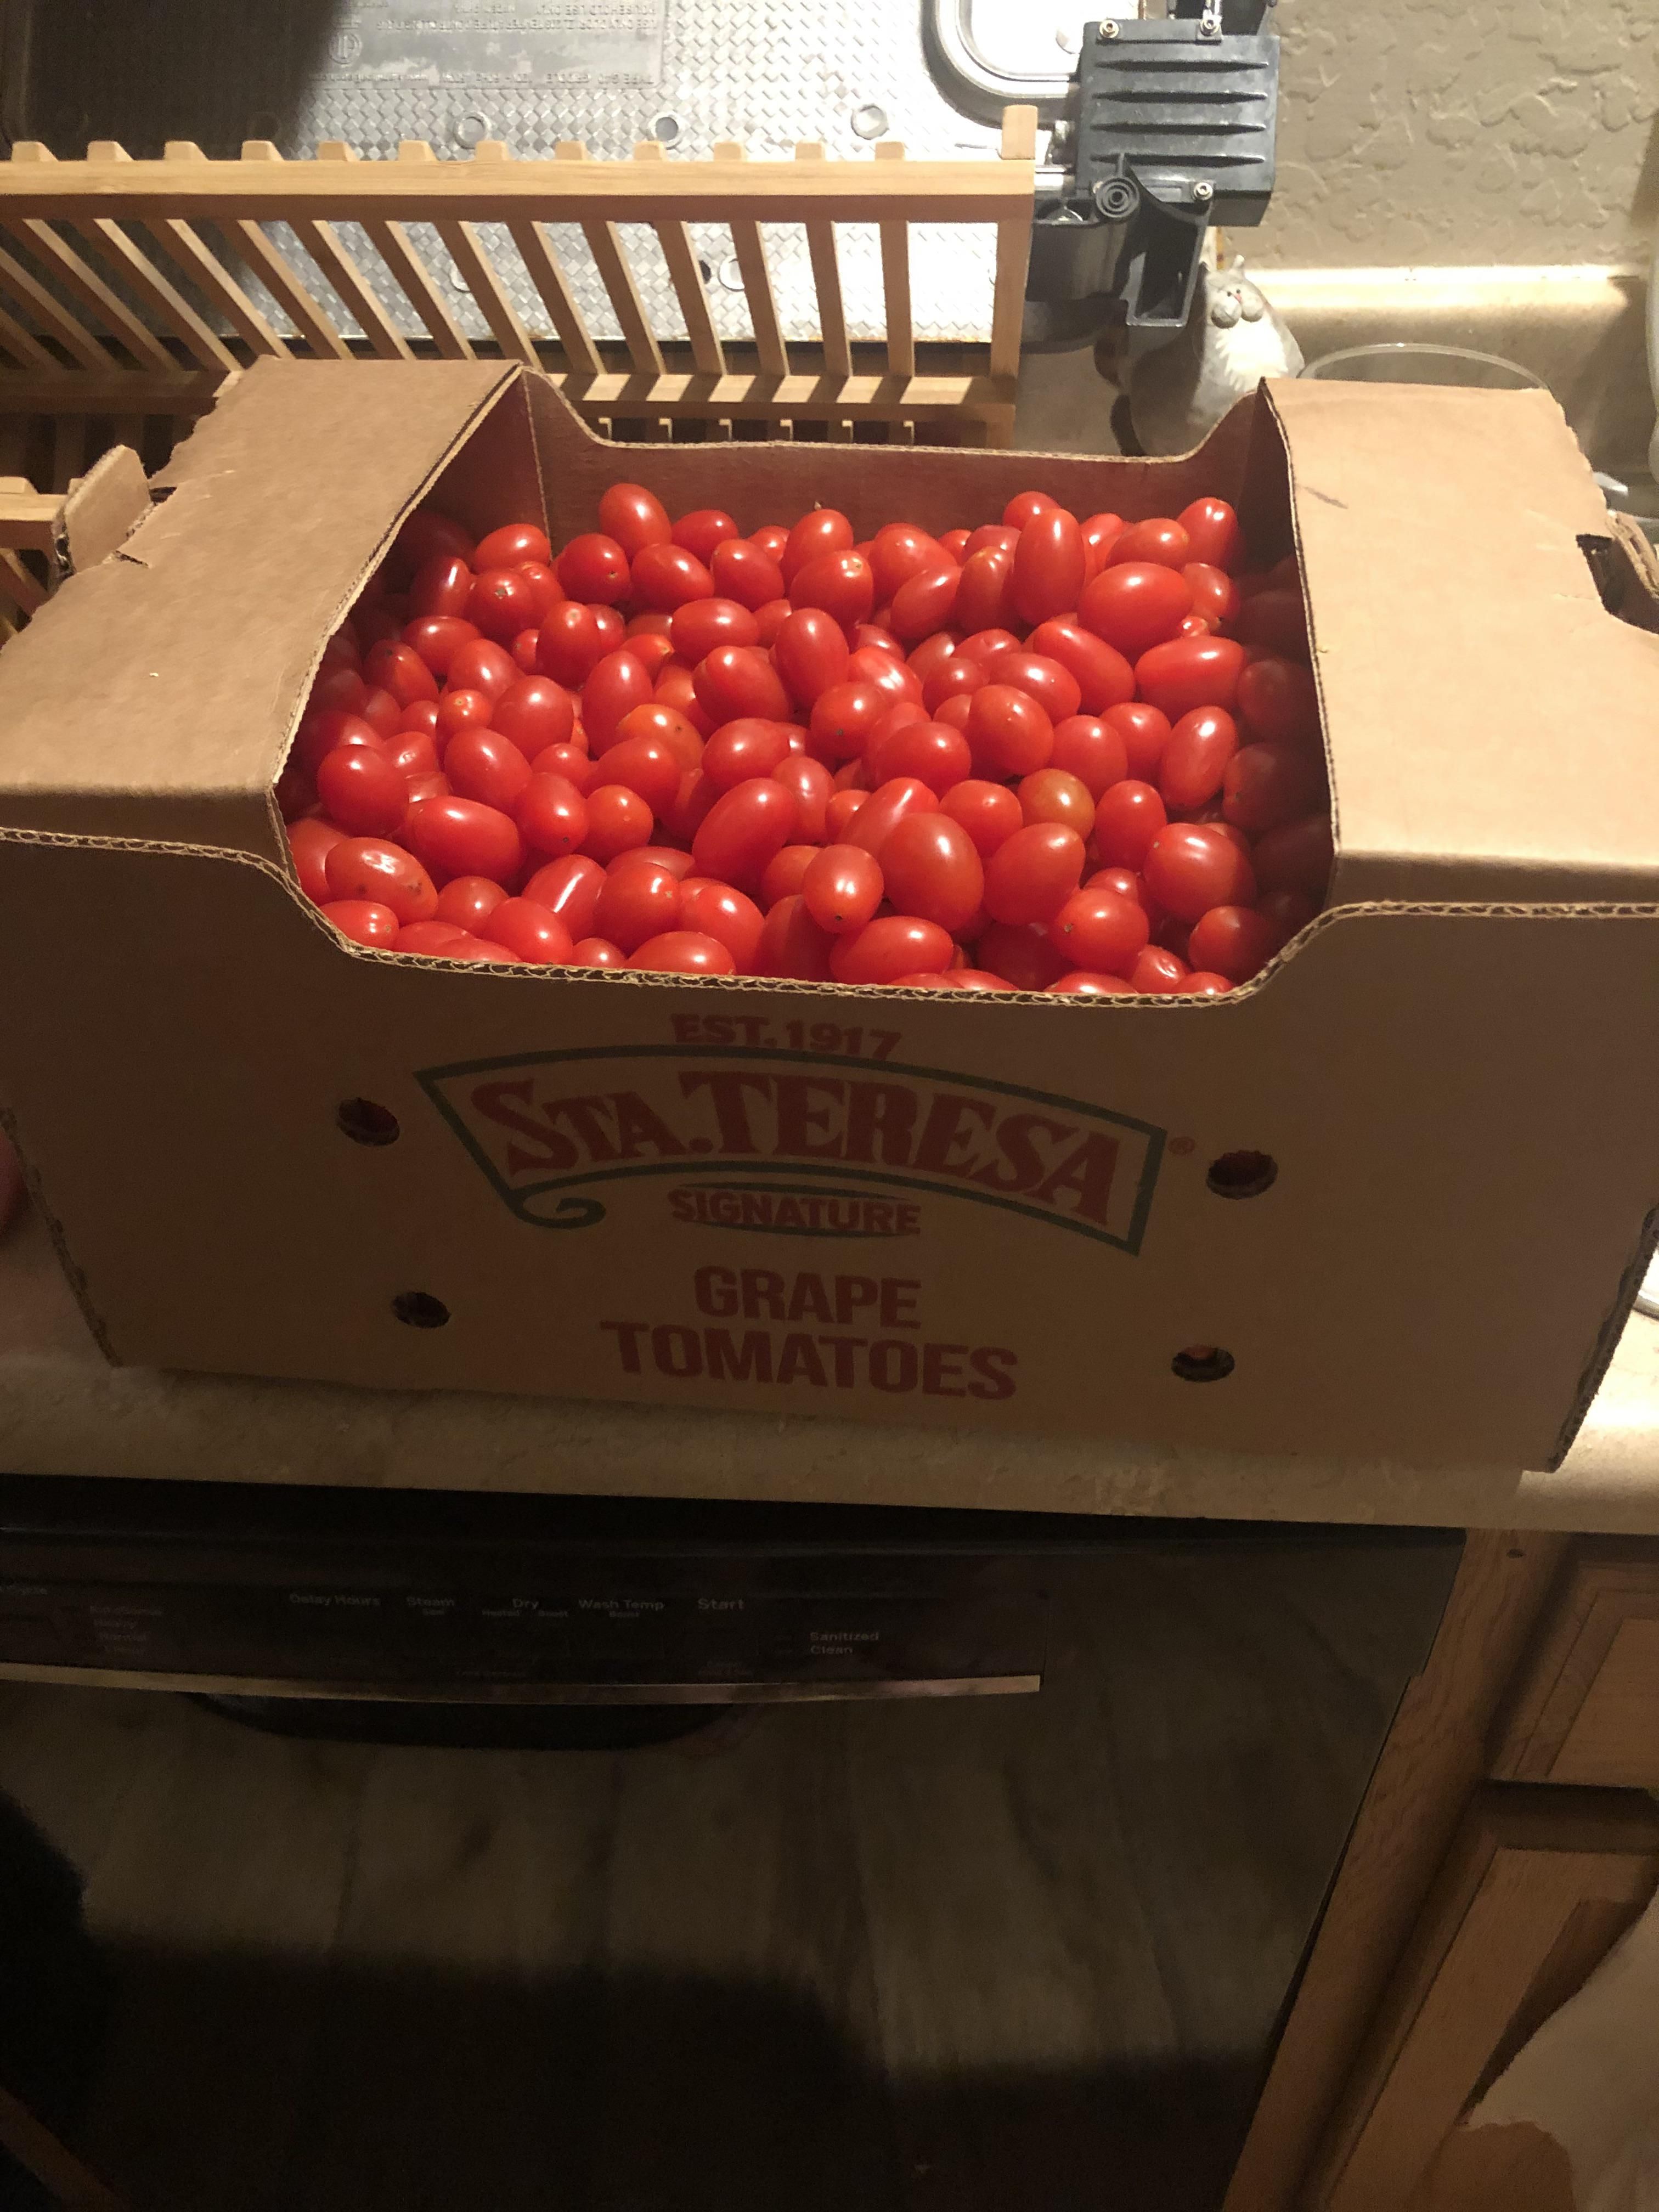 So, I asked my mom to grab some grape tomatoes. It’s a 20lb box. Guess I’ll be making tomato paste, tomato sauce and anything else that has a frigging tomato in it for the next forever... 20lbs!